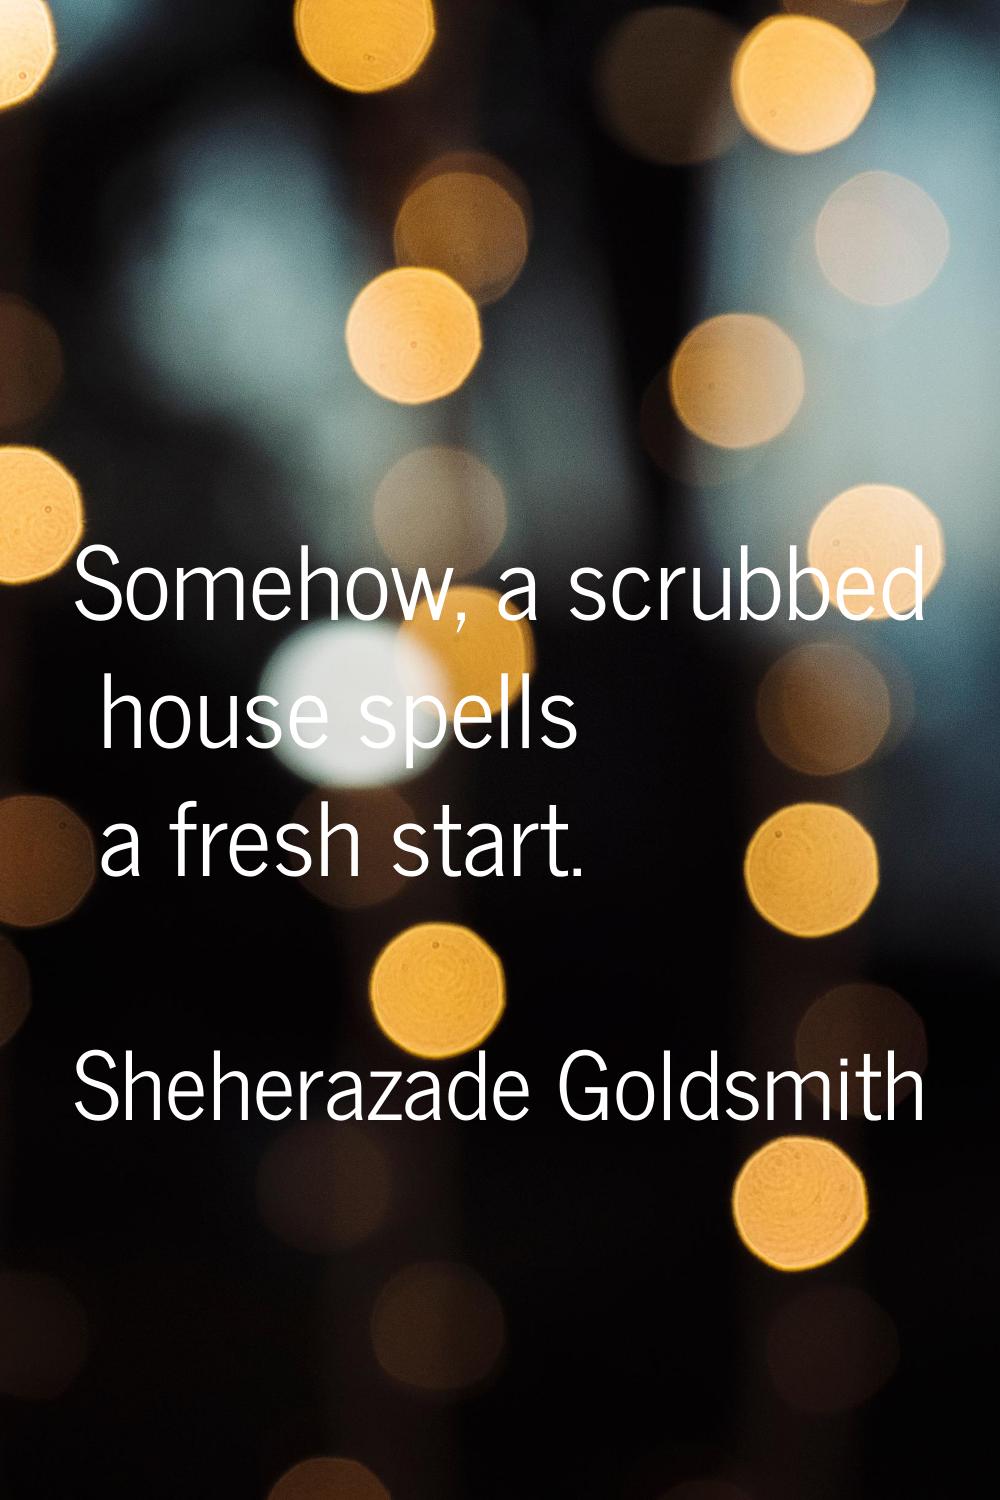 Somehow, a scrubbed house spells a fresh start.